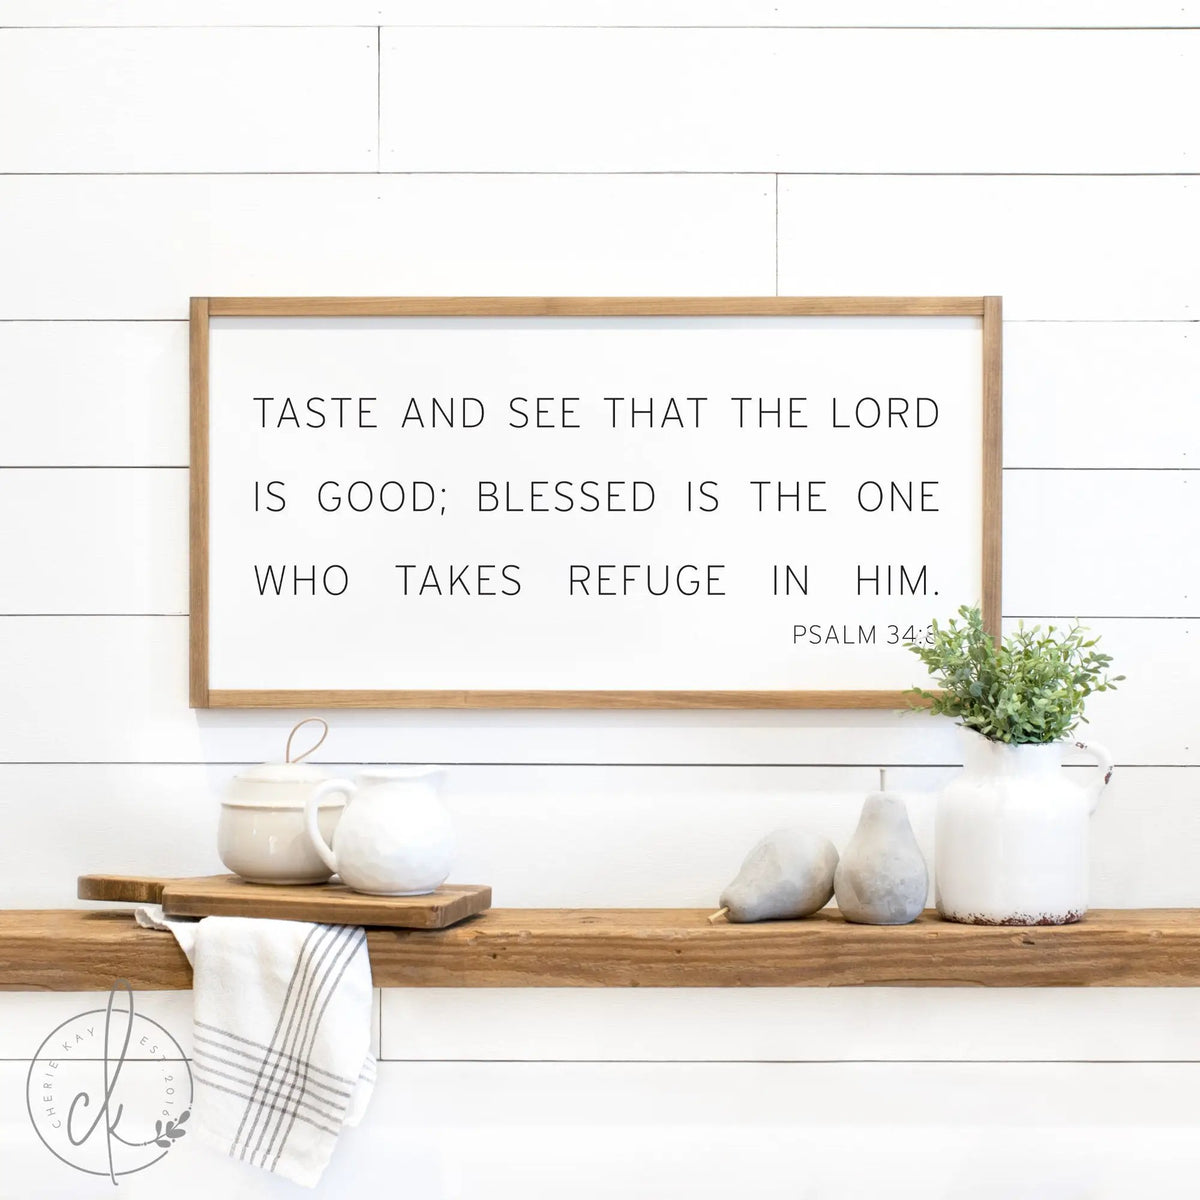 Taste And See That The Lord Is Good